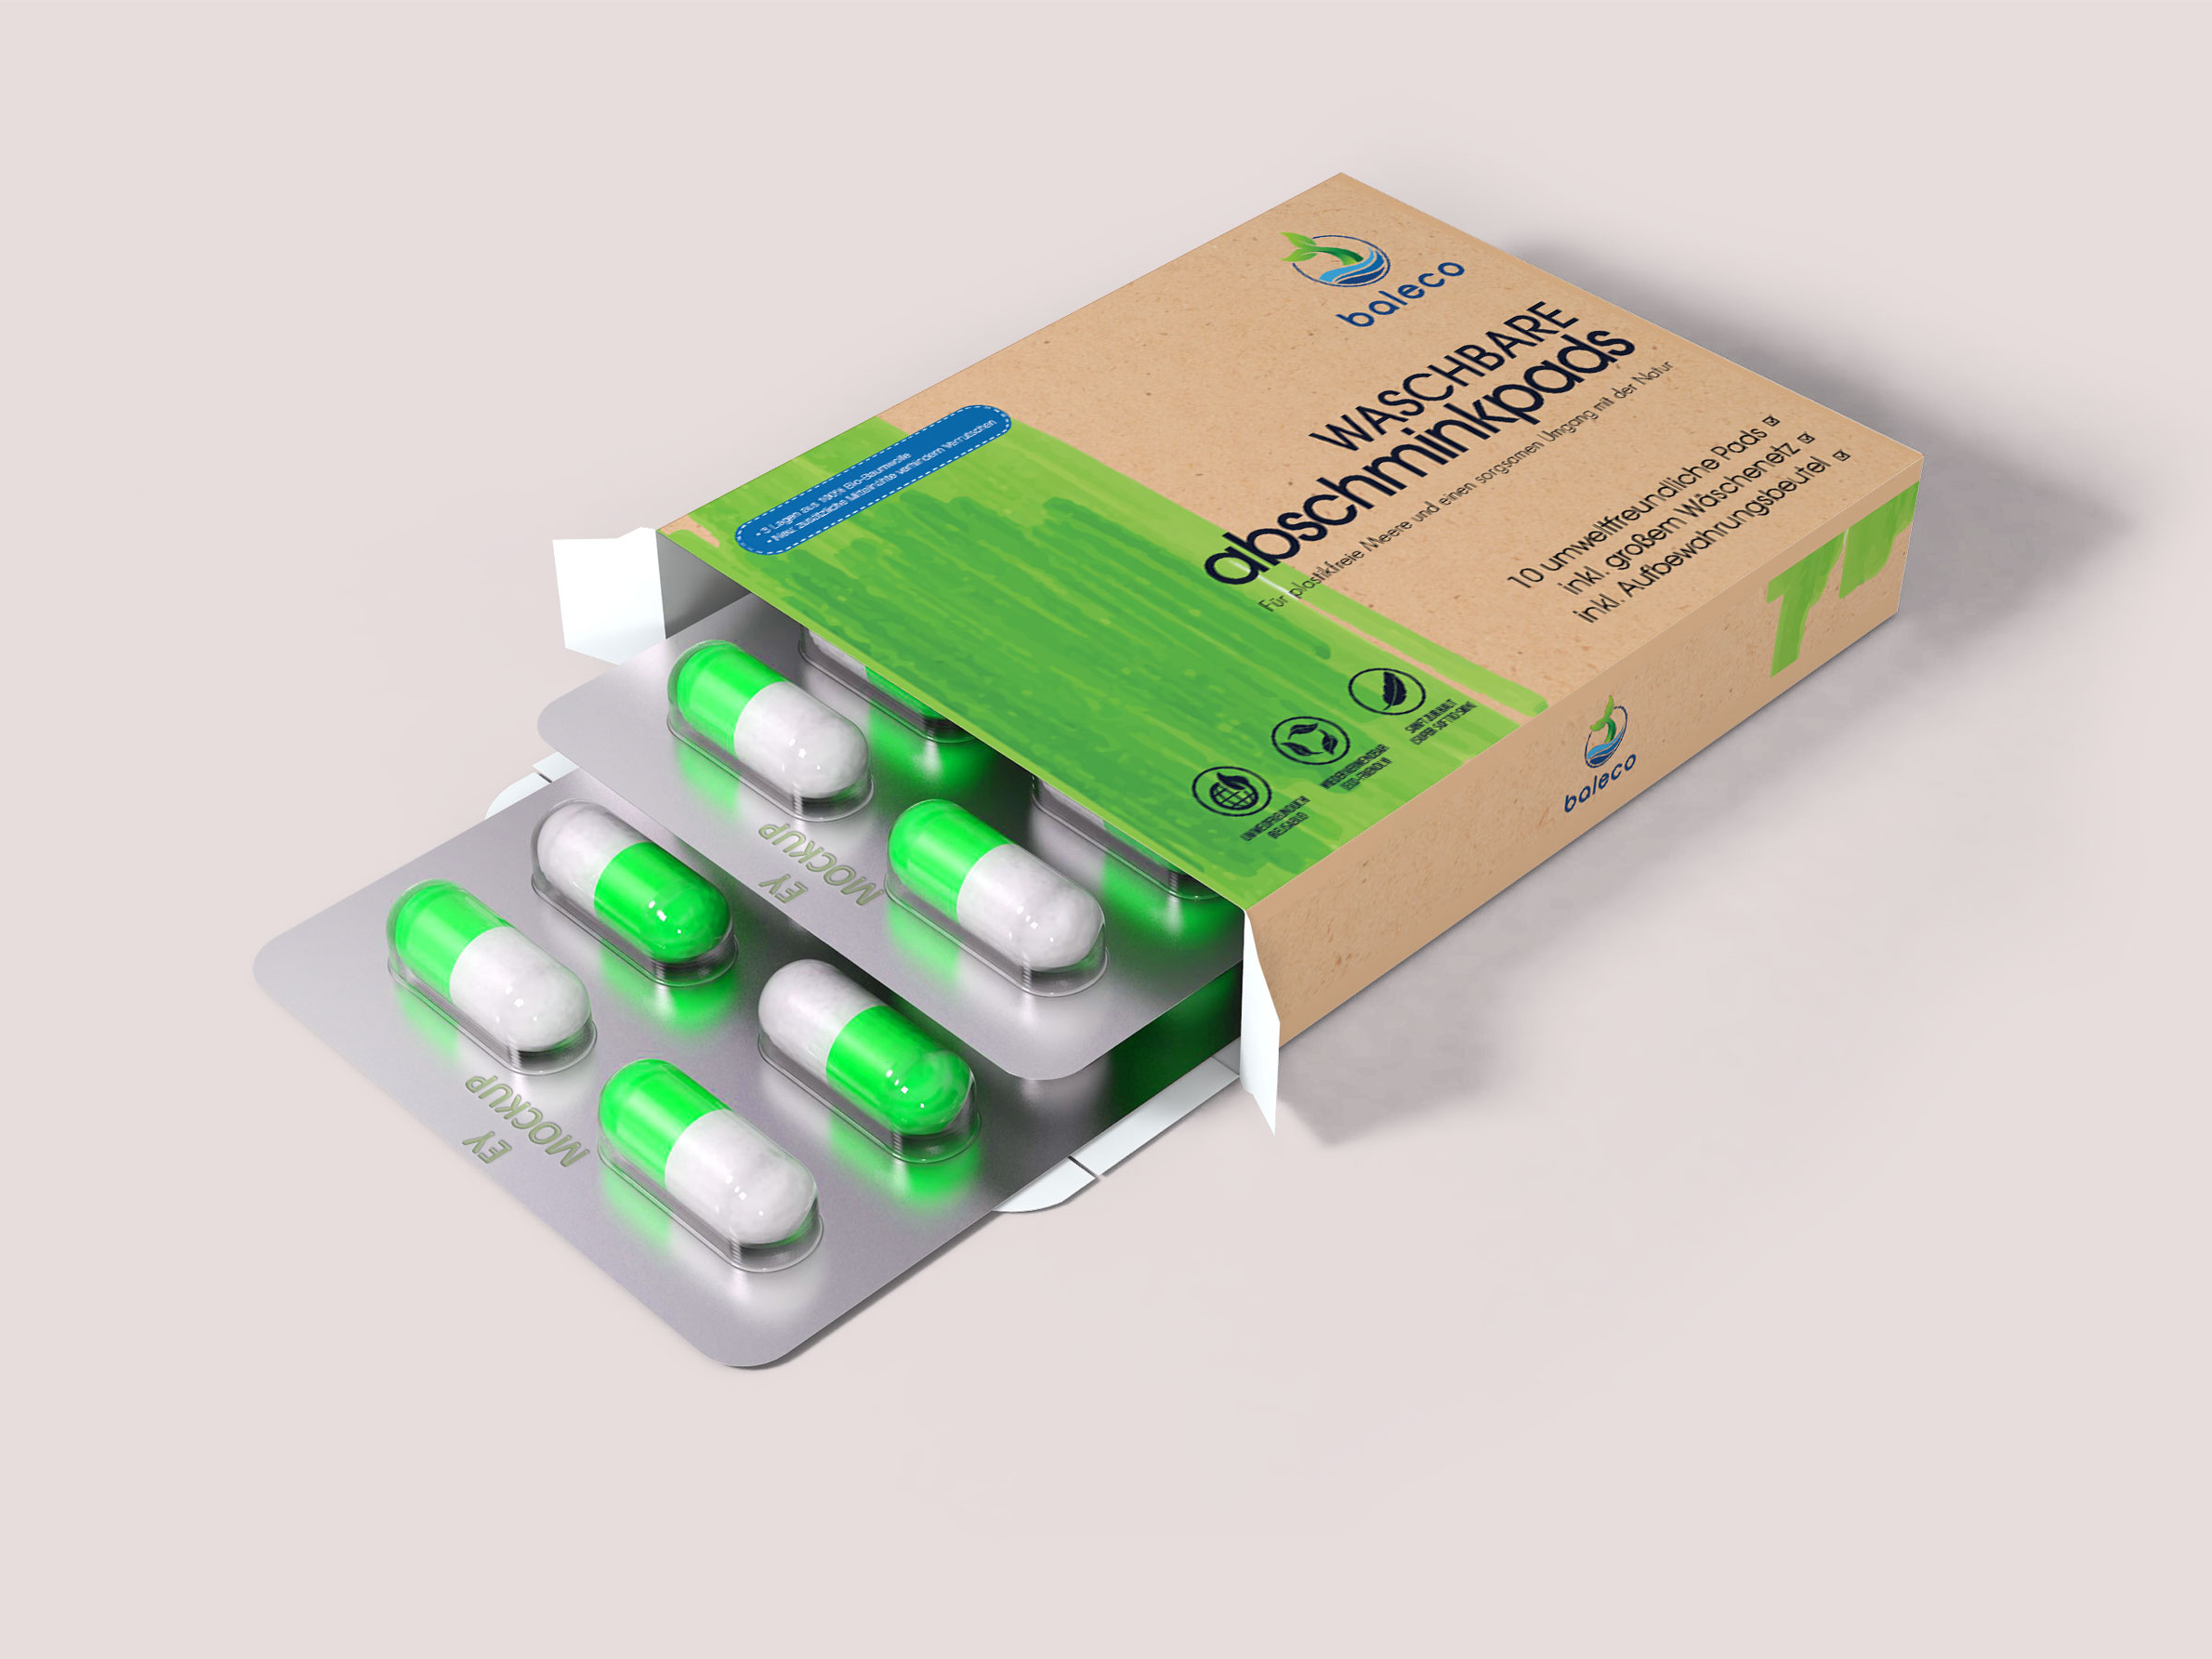 Download Free Medical Pill Packet Label Mockup by Anuj Kumar on Dribbble